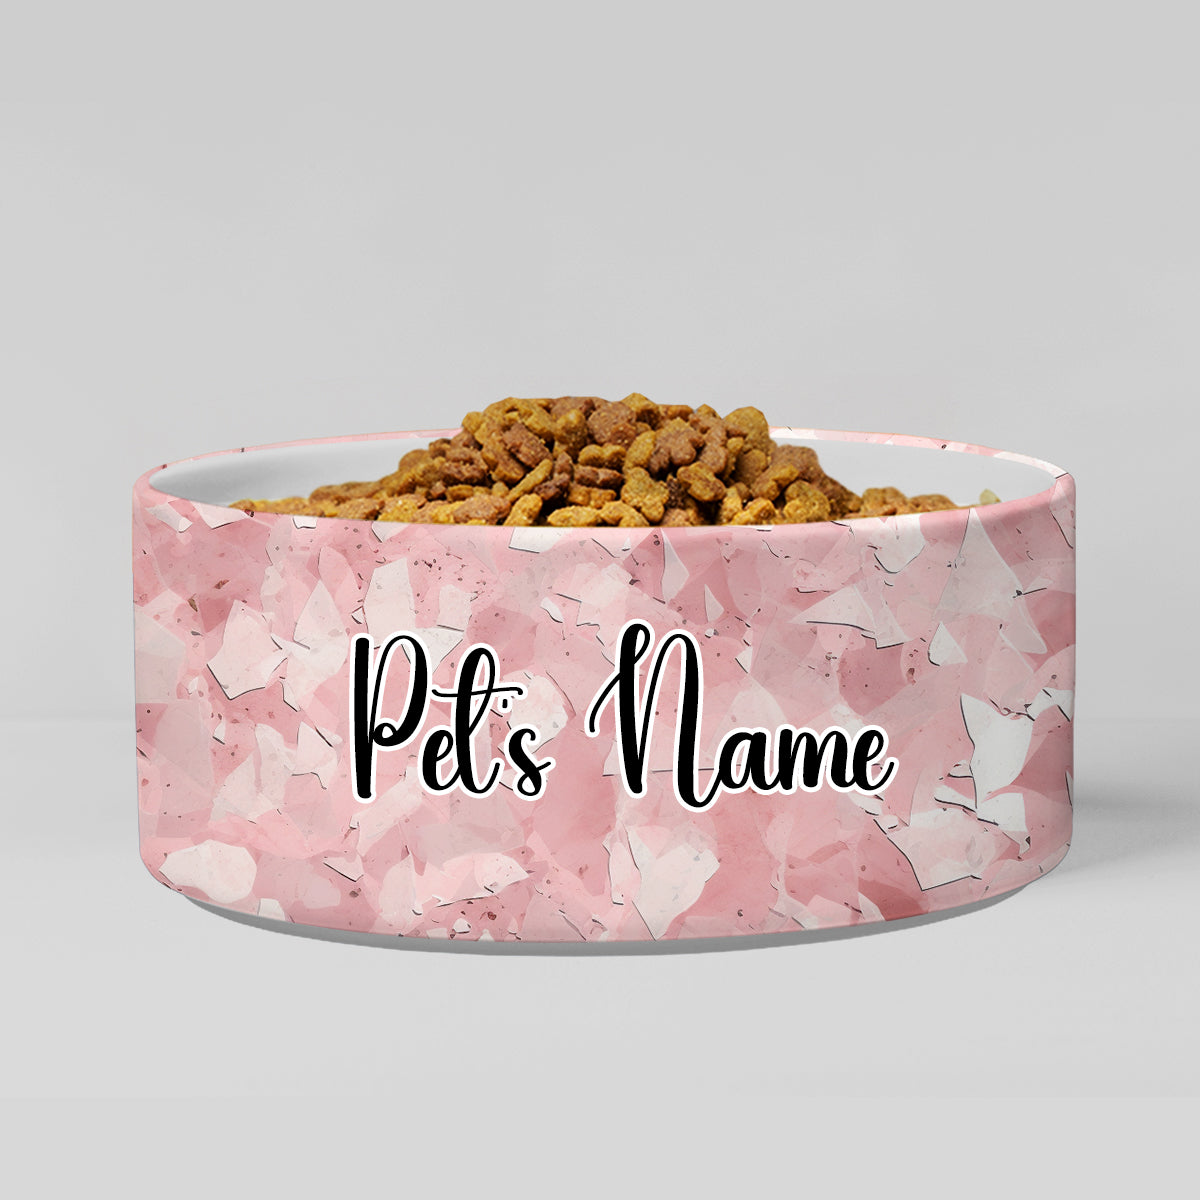 Personalized Dog Pet Cat Bowls, Boho Chic Terrazzo 04 Personalized Pet Bowls for Dogs and Cats, Eclectic Modern Spotted Dishes With Name, Ceramic Custom Cute Dog Bowls, Designer Large and Small Dog Cat Pet Bowls Dish, Gift for Pet